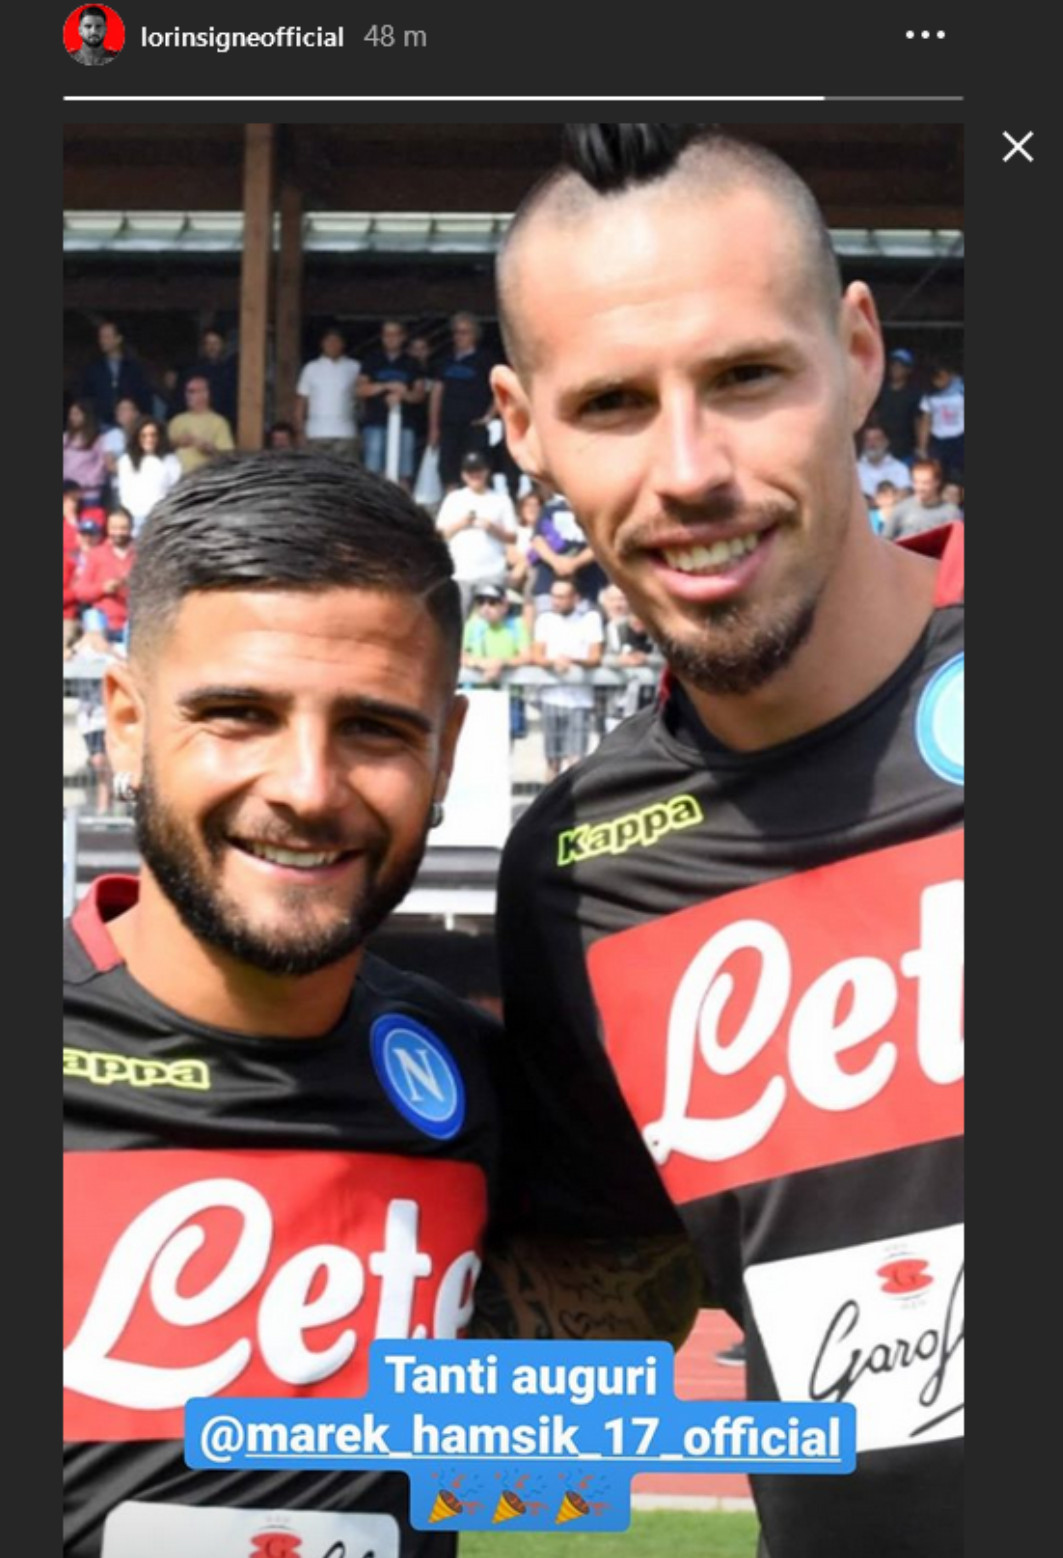 Insigne Hamsik Compleanno